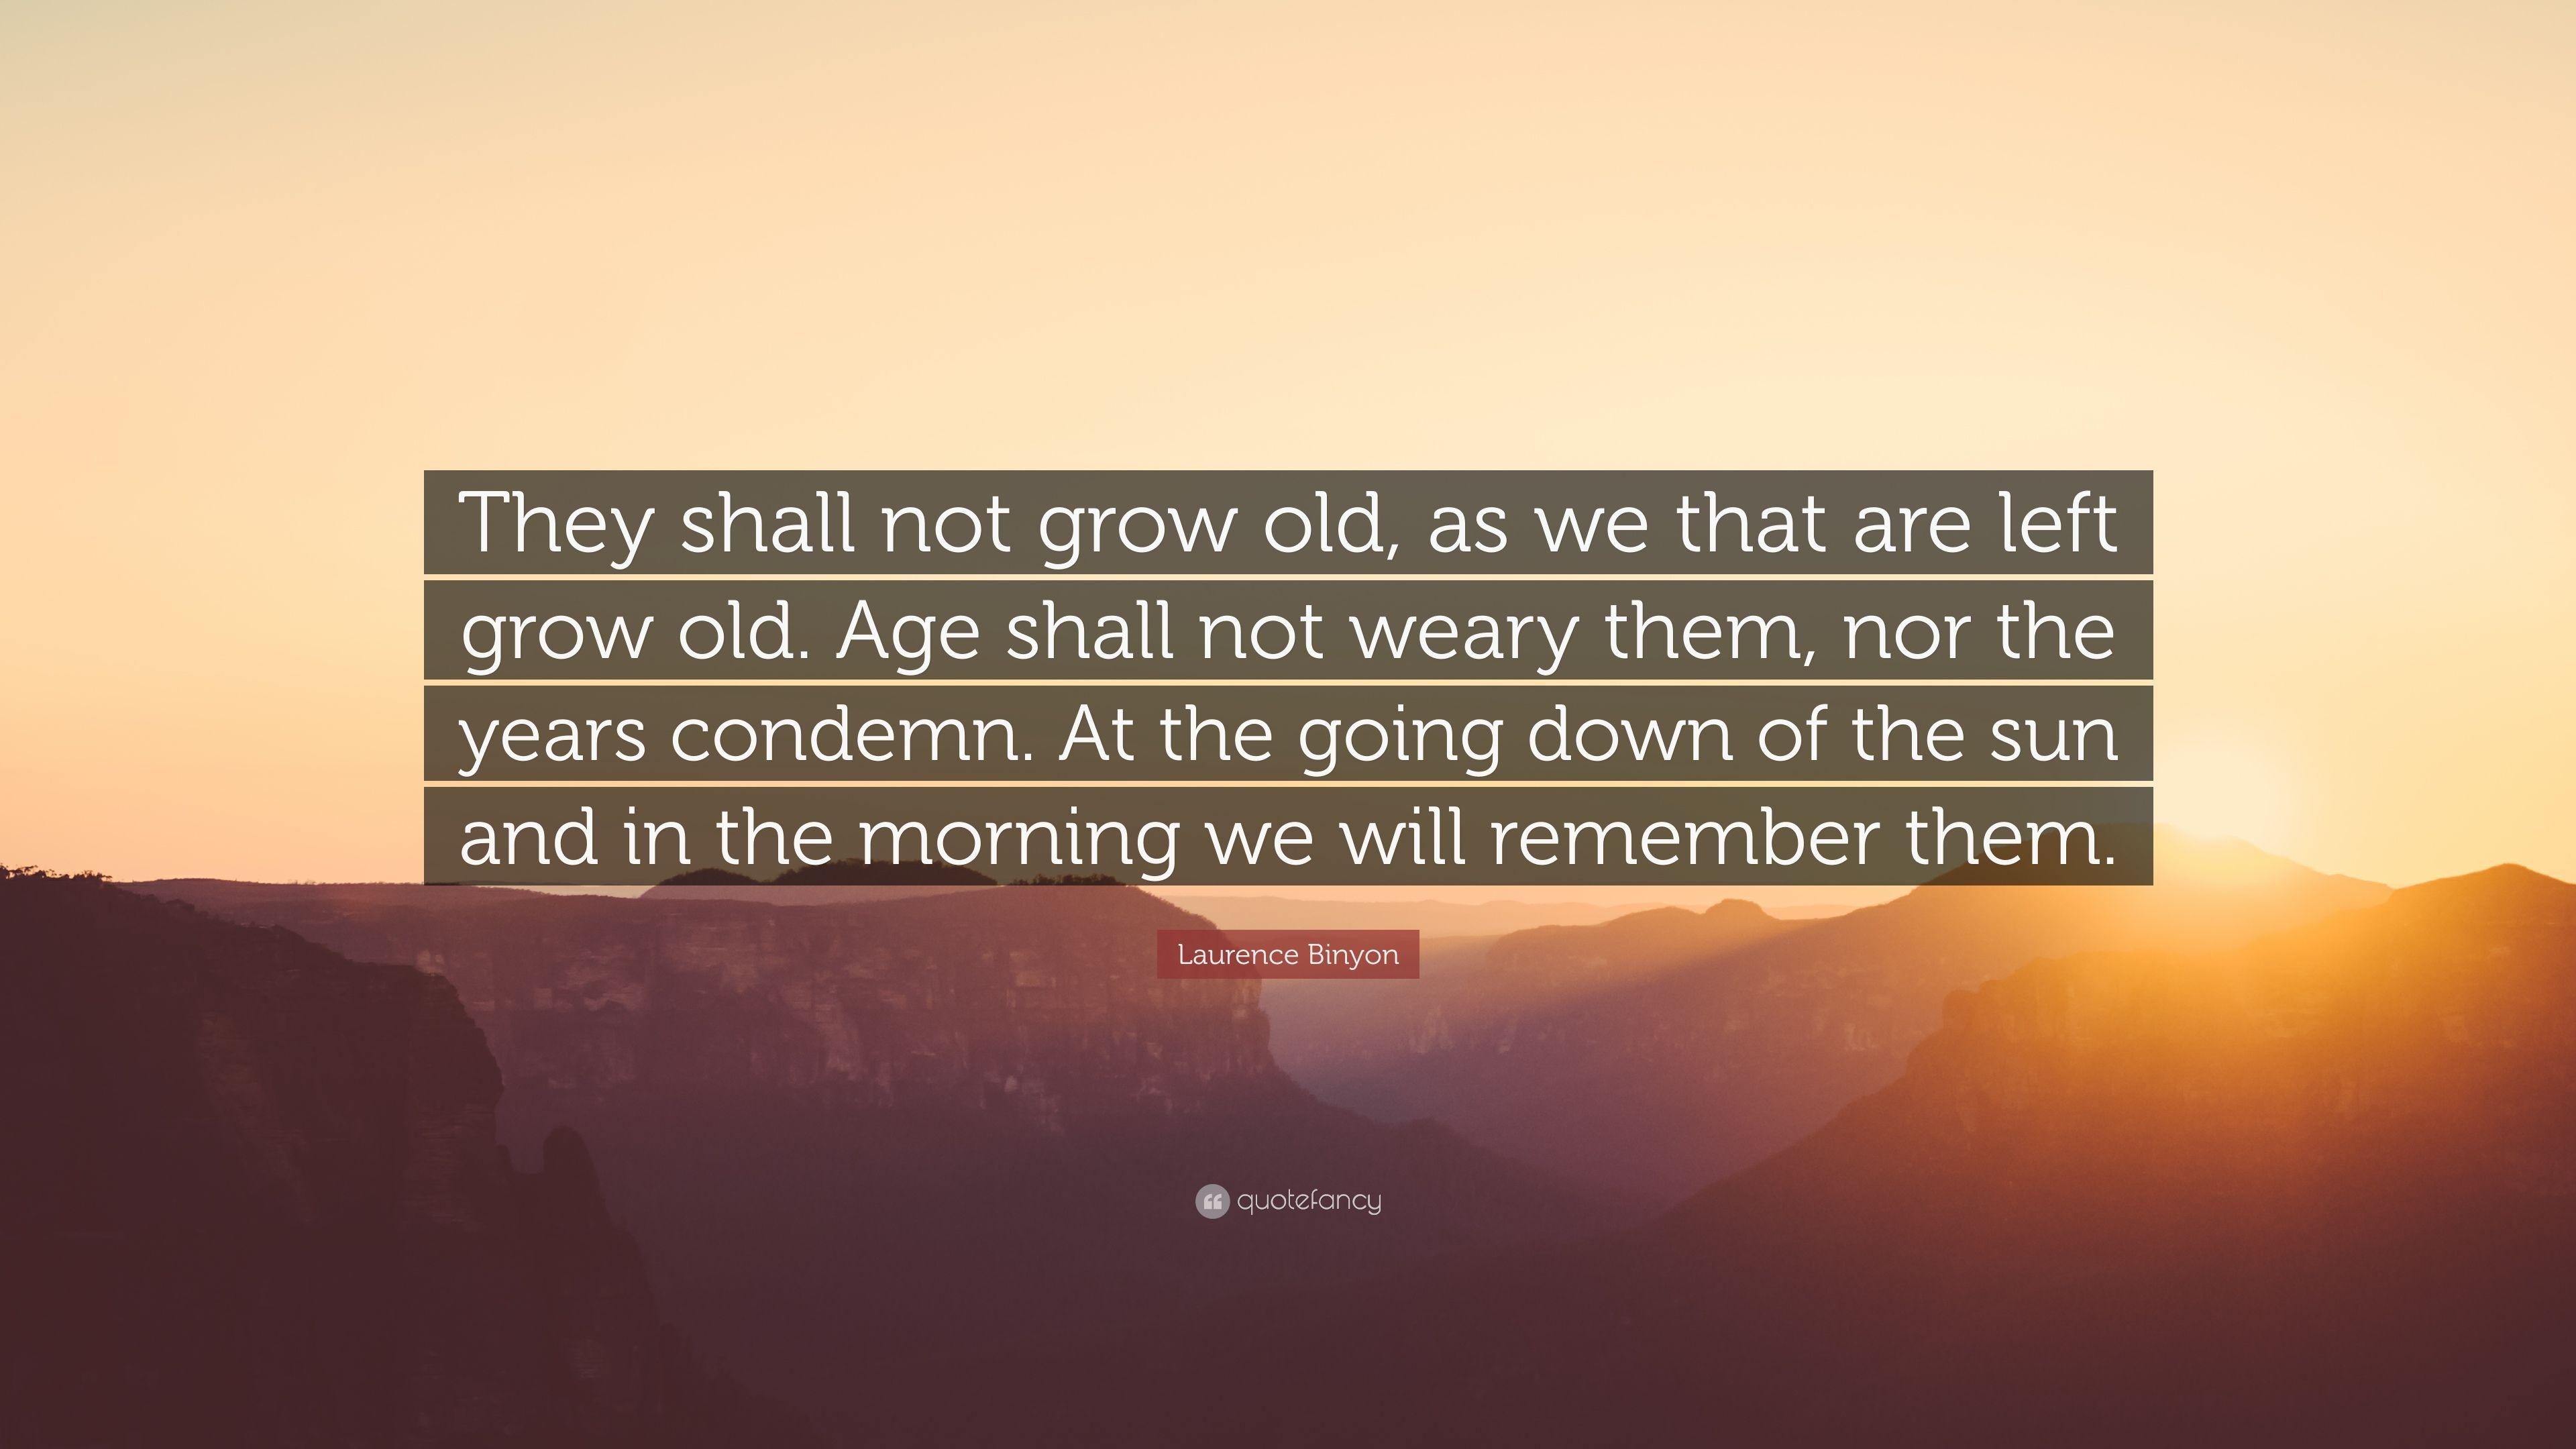 Laurence Binyon Quote: “They shall not grow old, as we that are left